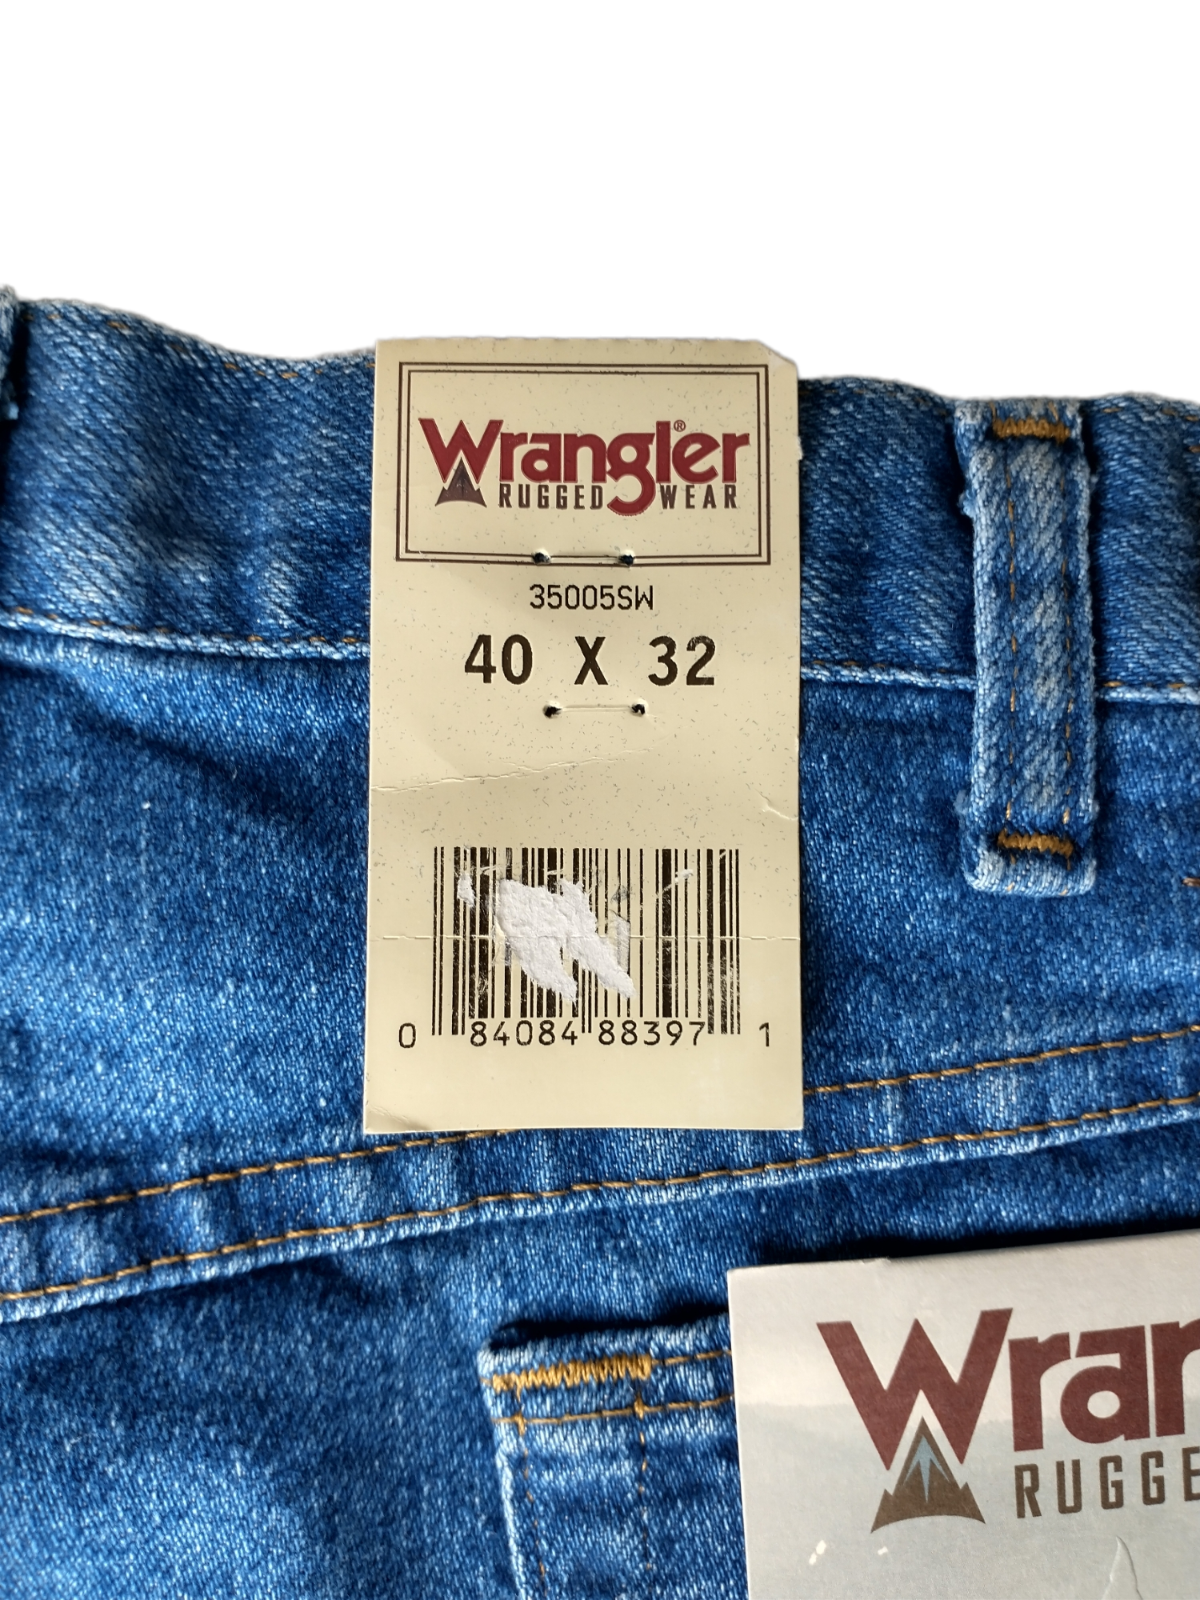 New Wrangler Mens Jeans 40x32 Rugged Wear 35005SW Relaxed Fit Easy over  Boots | eBay